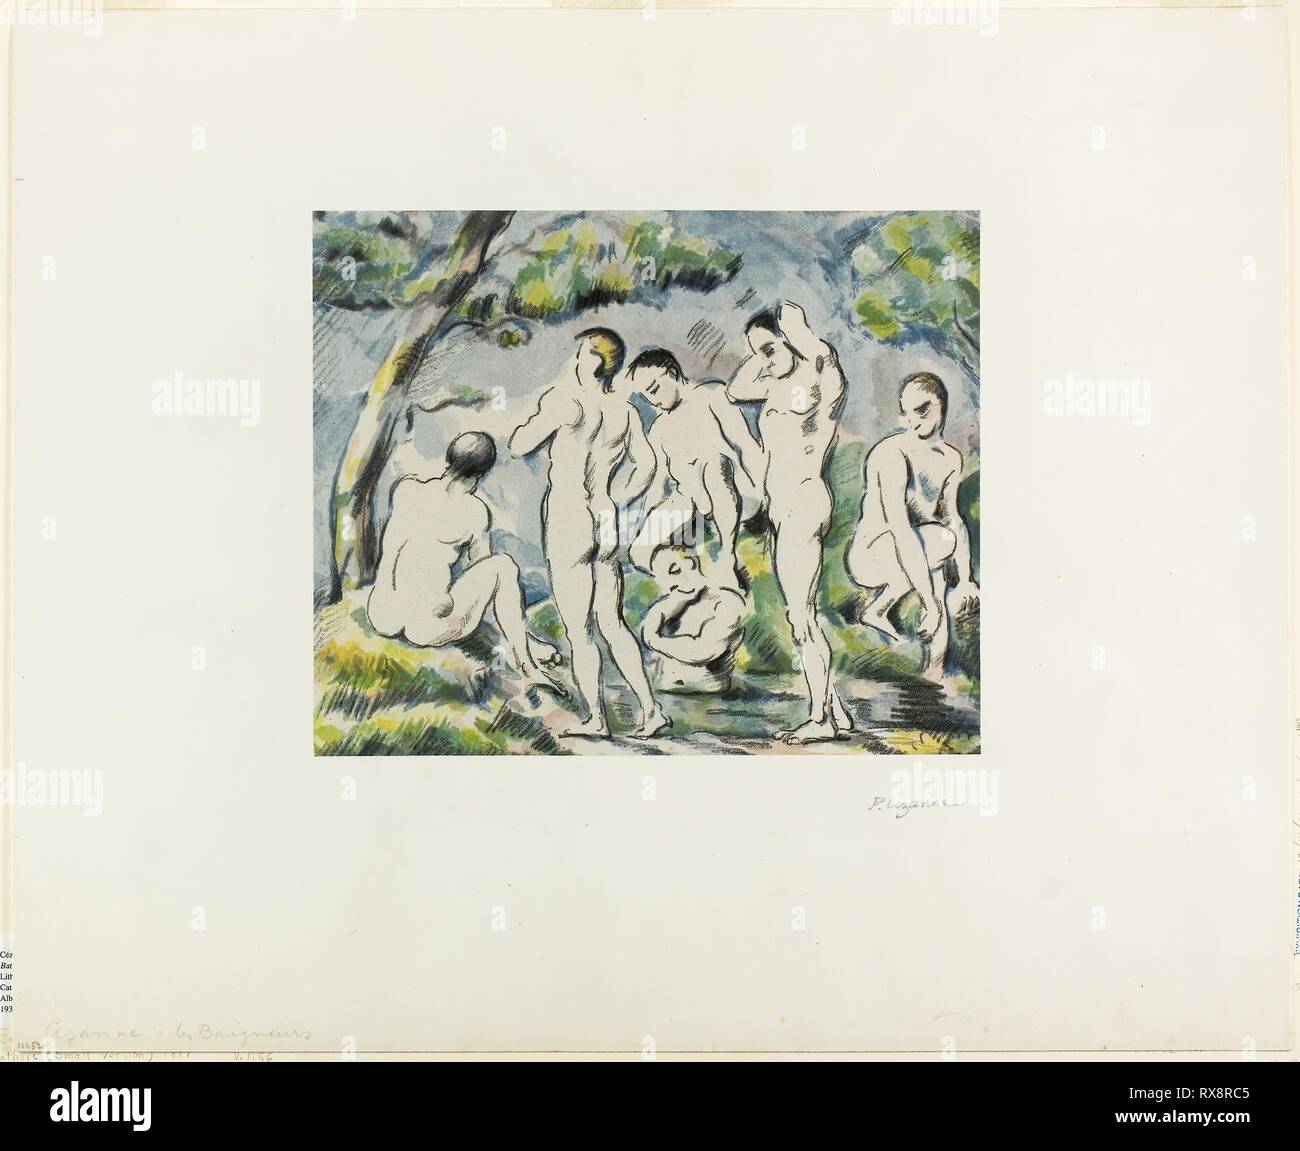 Bathers. Paul Cézanne; French, 1839-1906. Date: 1897. Dimensions: 221 × 269 mm (image/primary support); 420 × 513 mm (sheet). Color lithograph on ivory China paper, laid down on ivory wove card. Origin: France. Museum: The Chicago Art Institute. Stock Photo